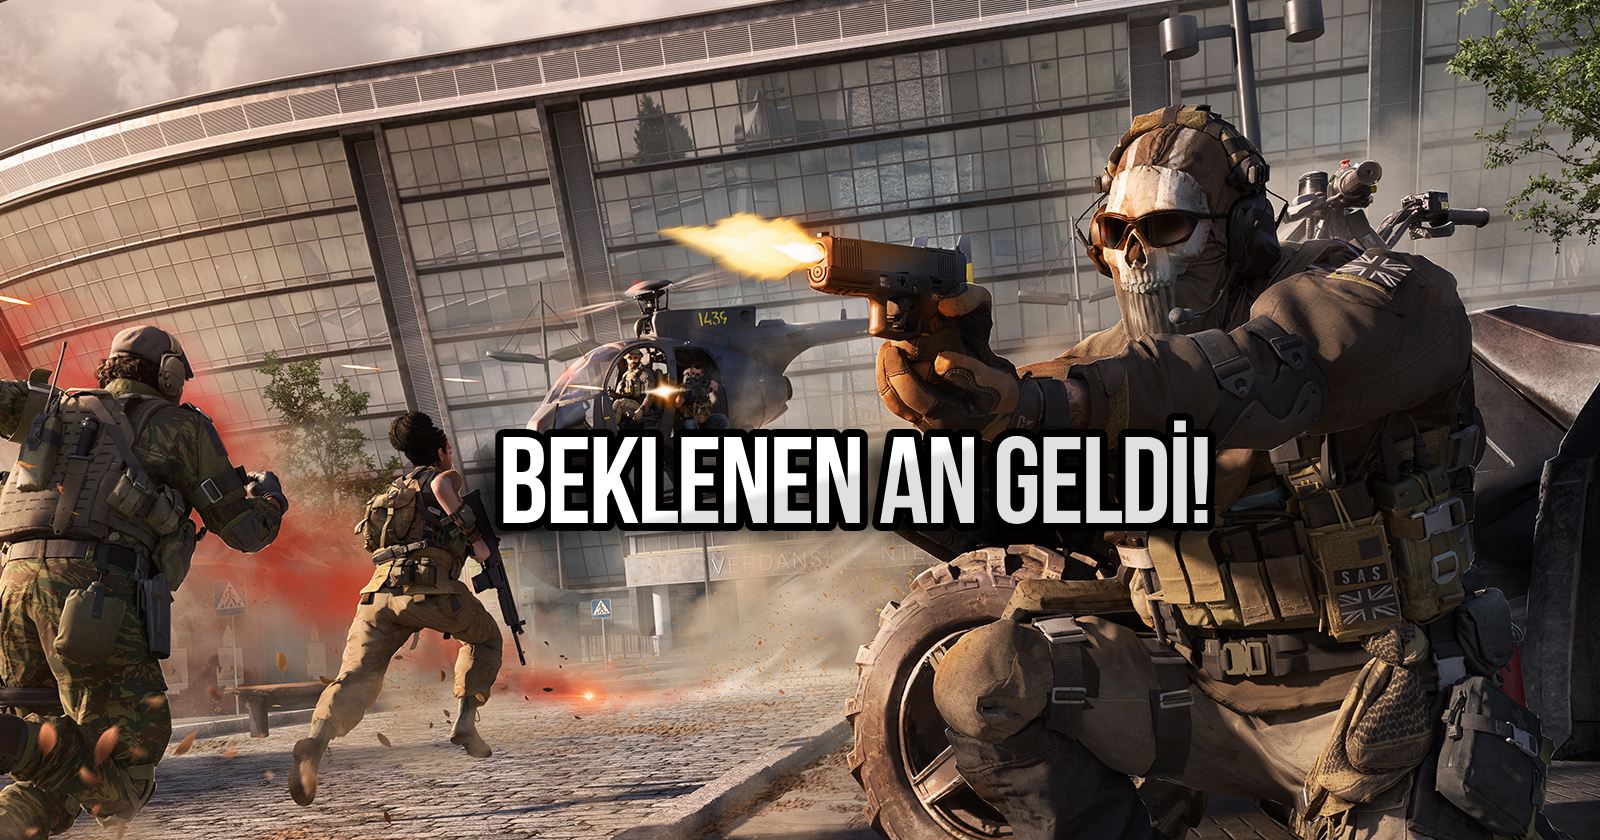 call of duty warzone mobile, call of duty warzone mobile çıkış tarihi, warzone mobile çıkış tarihi, call of duty warzone oyunu, call of duty warzone mobil oyunu